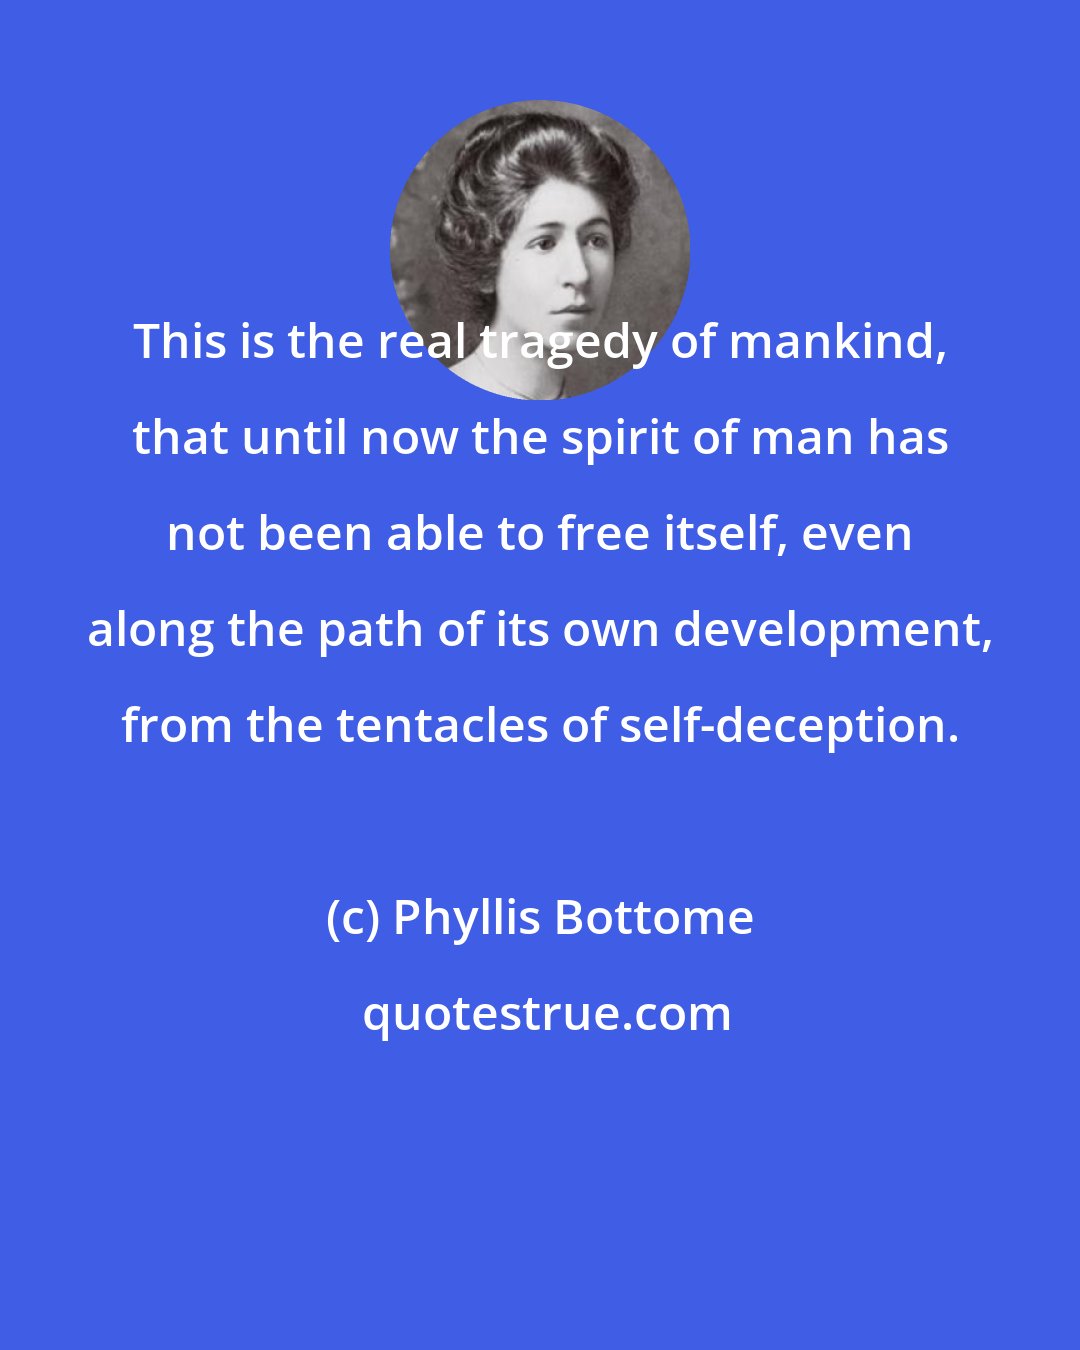 Phyllis Bottome: This is the real tragedy of mankind, that until now the spirit of man has not been able to free itself, even along the path of its own development, from the tentacles of self-deception.